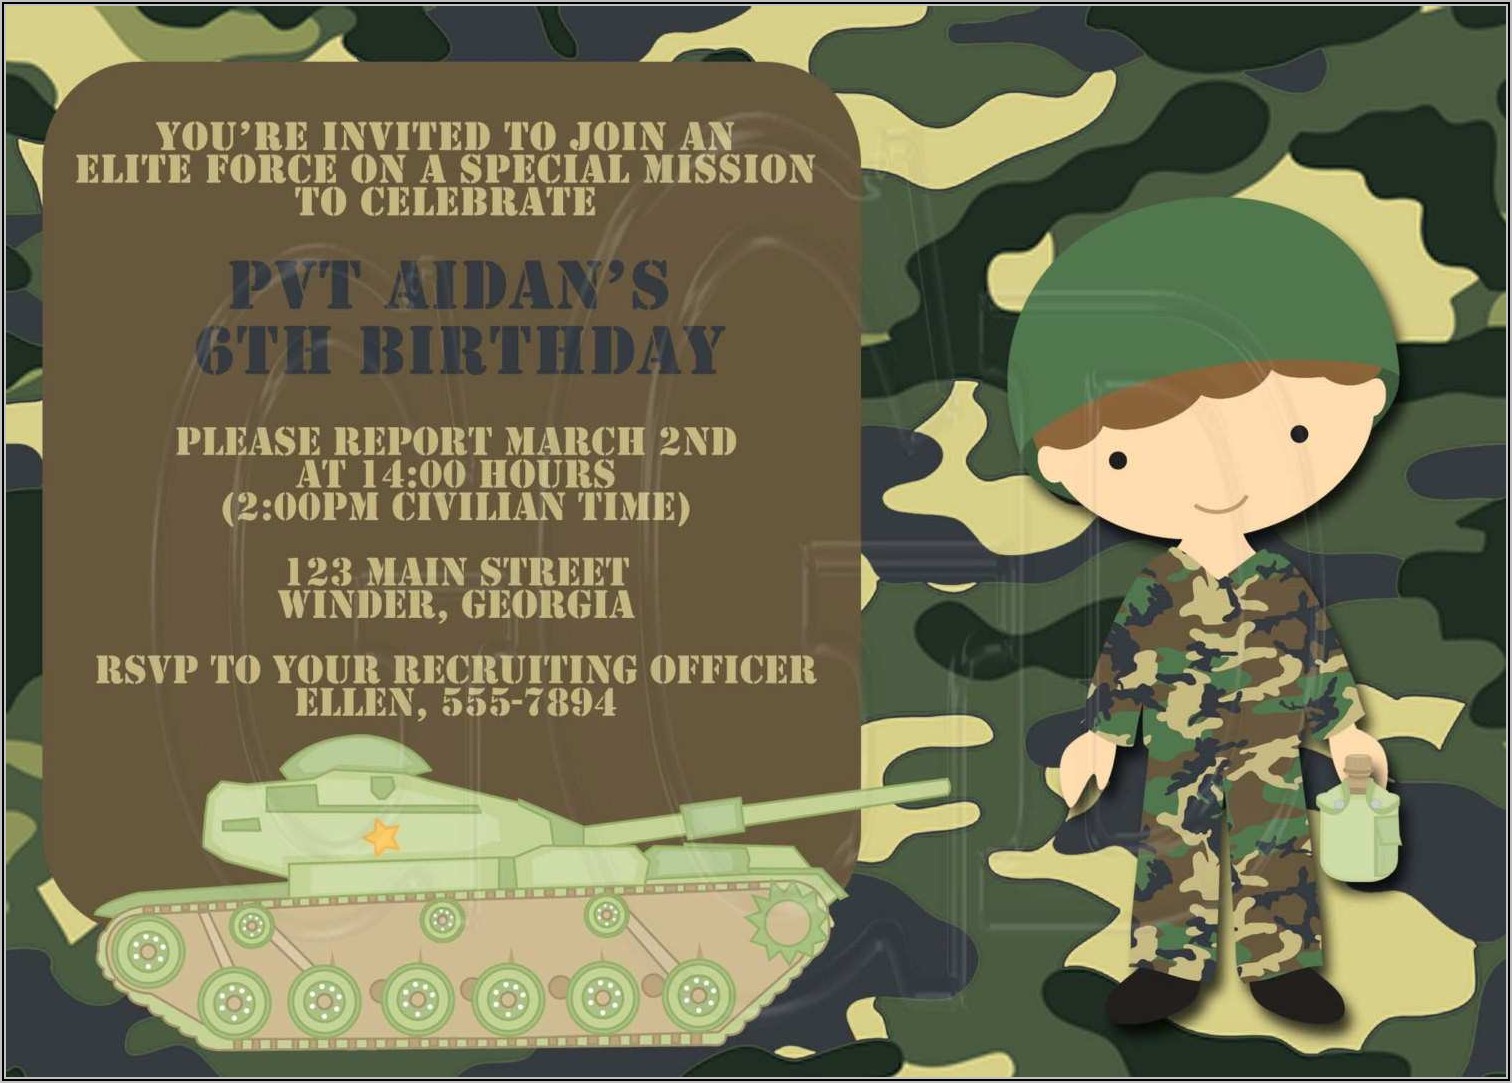 Camouflage Party Invitation Template Free